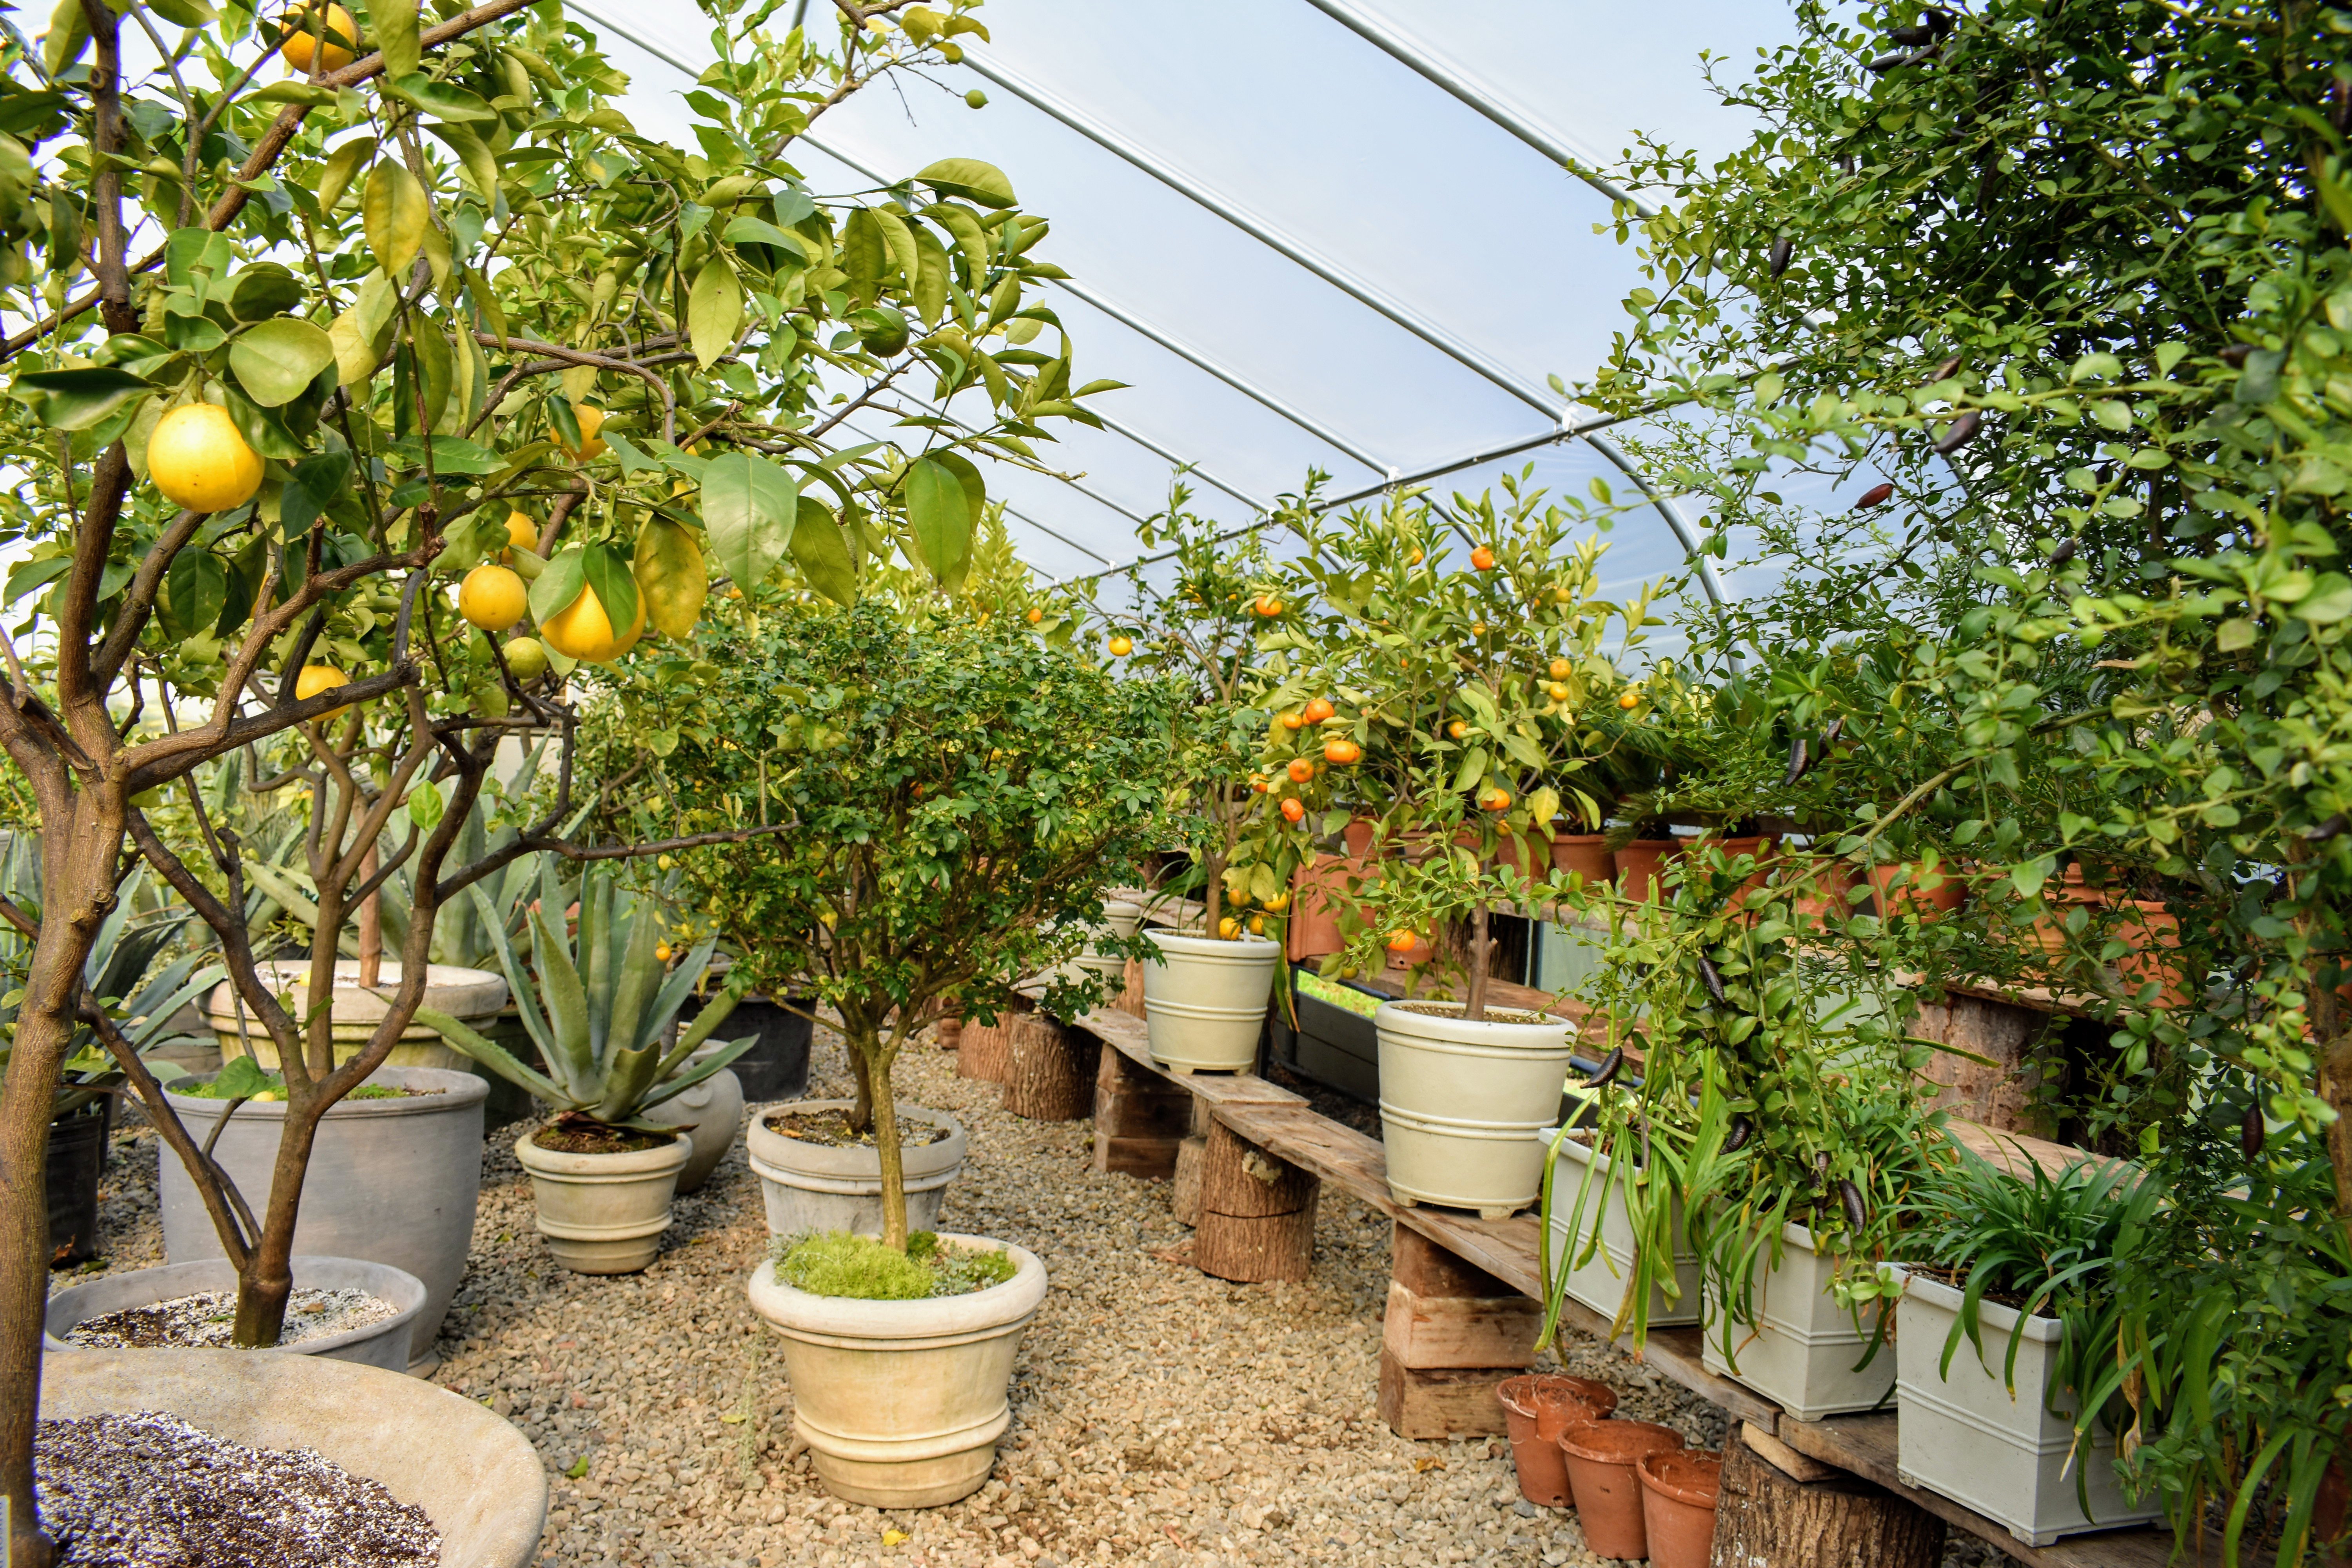 Fruits you can farm and grow in a greenhouse: Citrus Fruits